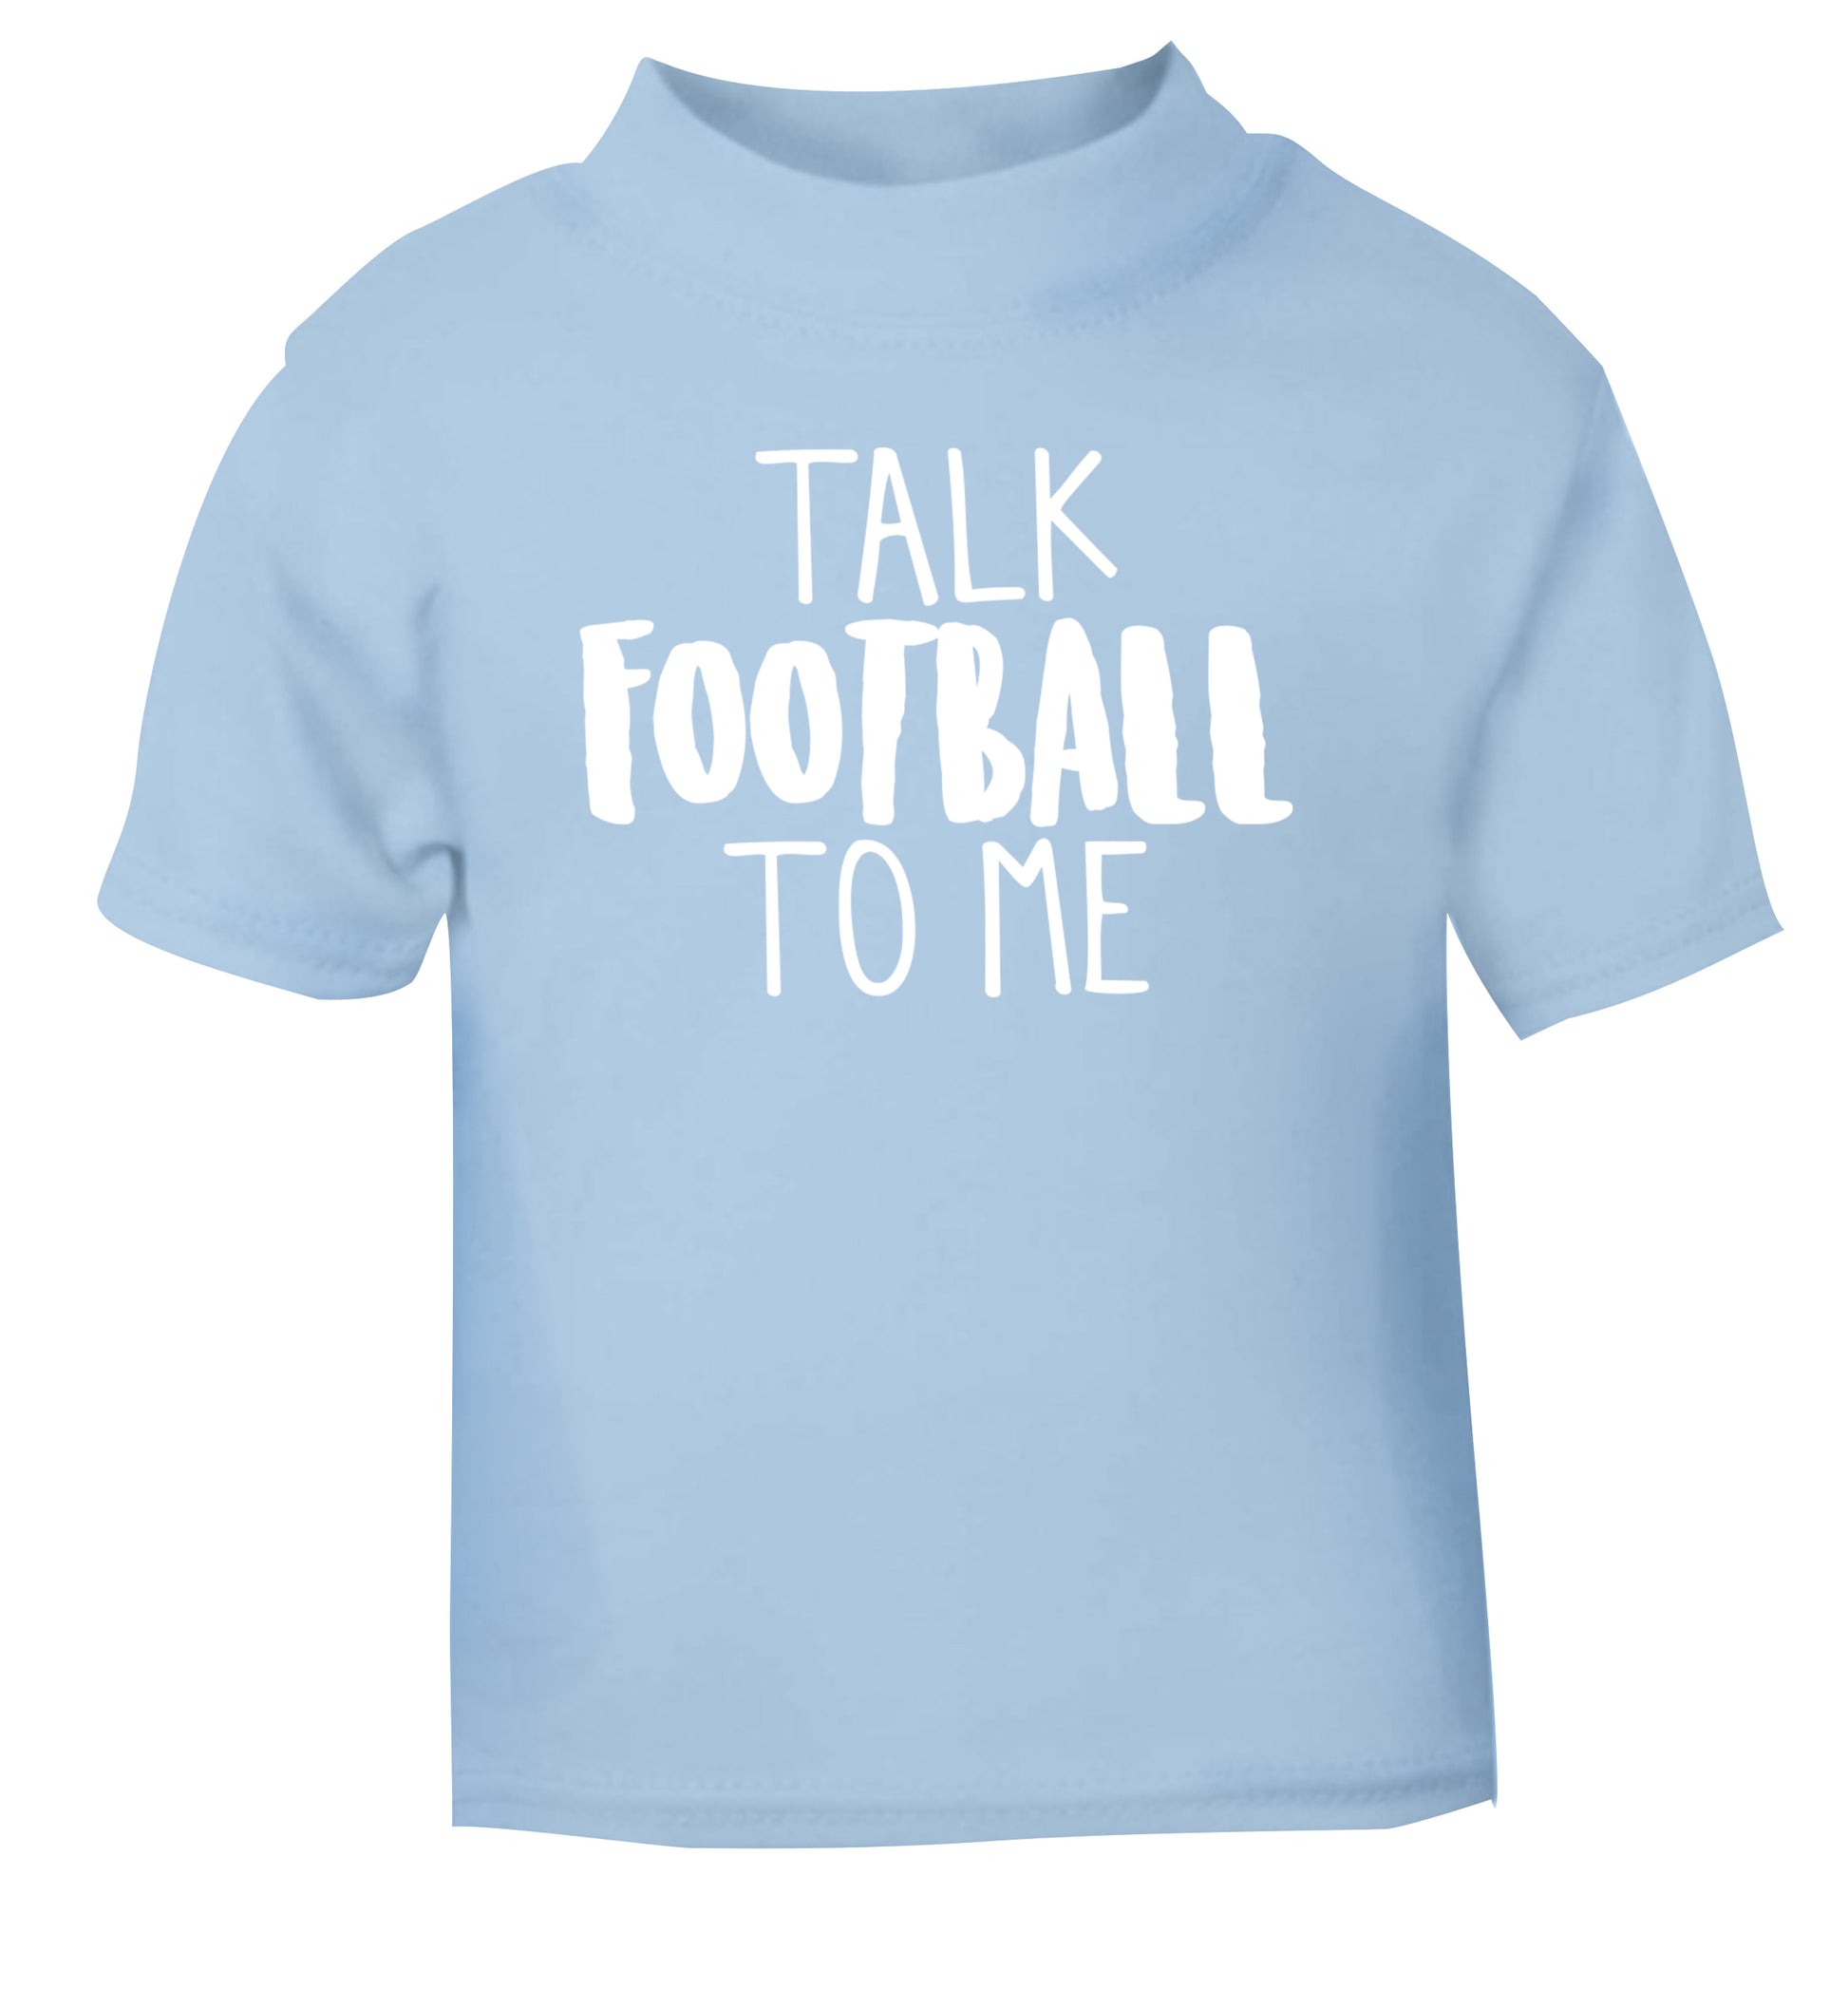 Talk football to me light blue Baby Toddler Tshirt 2 Years